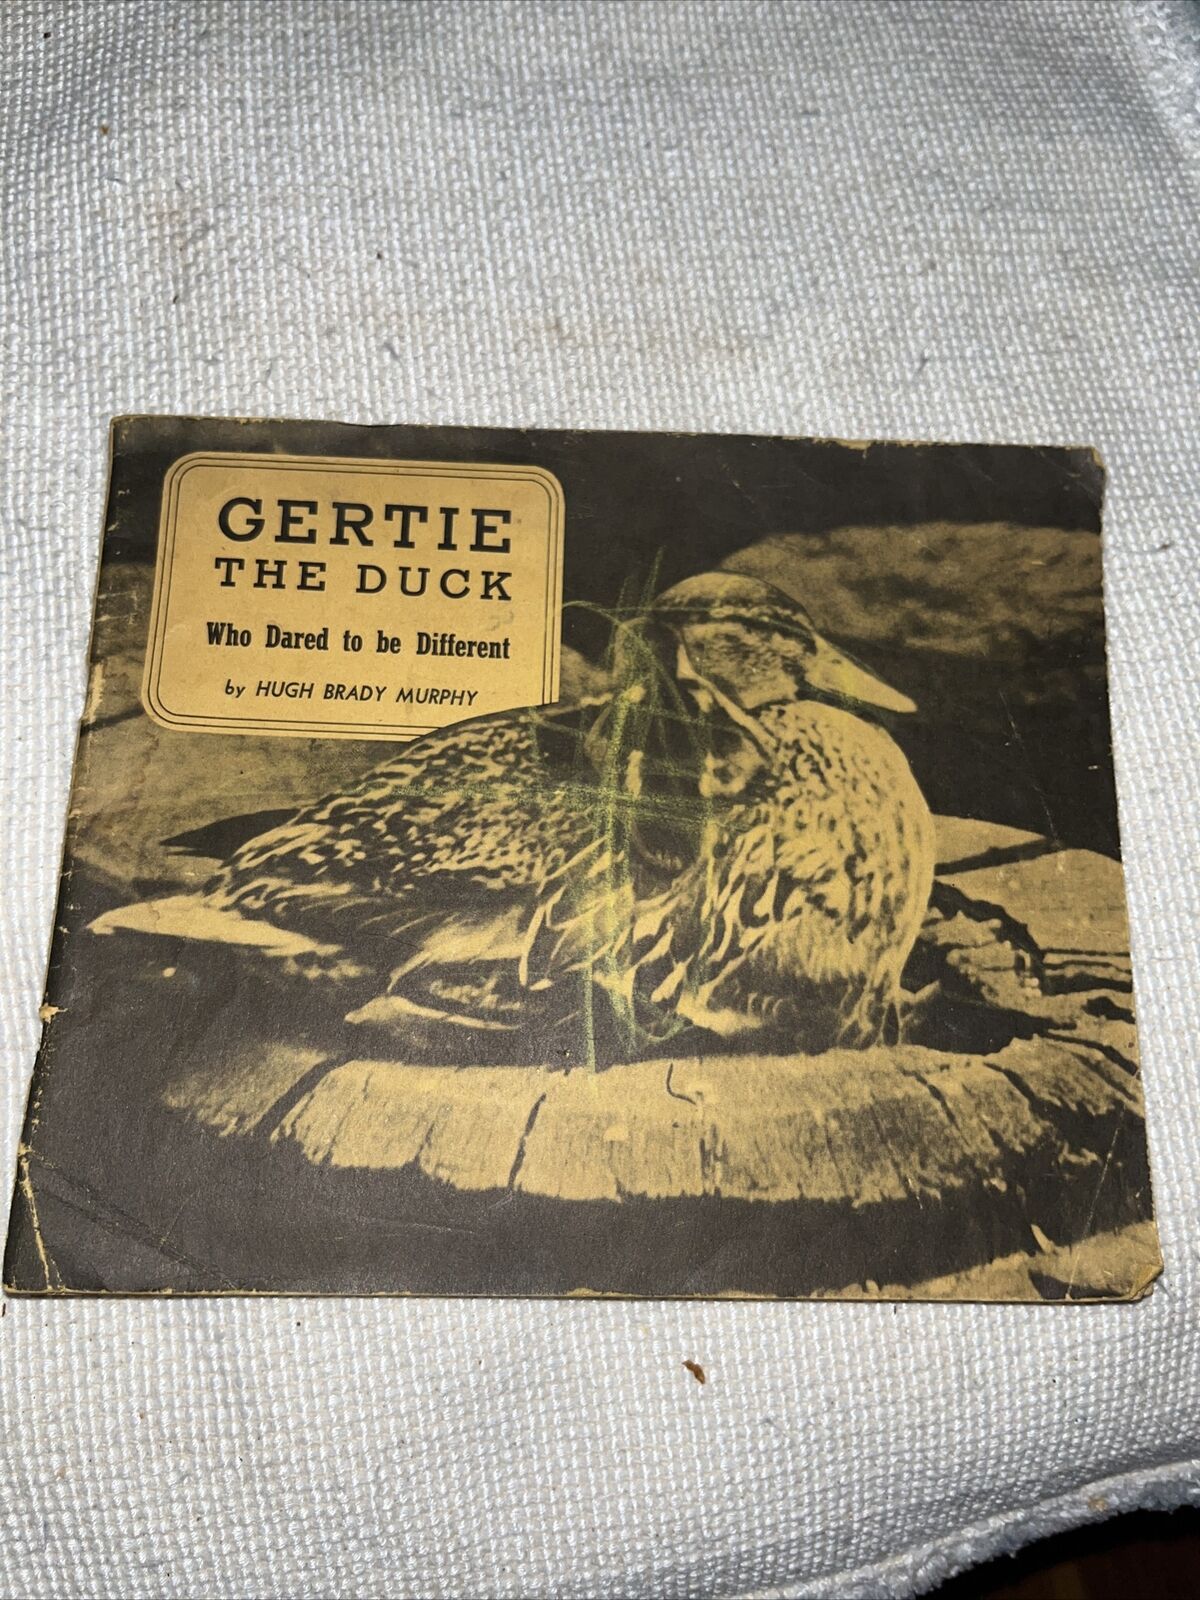 Gertie The Duck Who Dared to be different: Hugh Brady Murphy 1945 WWII Milwaukee